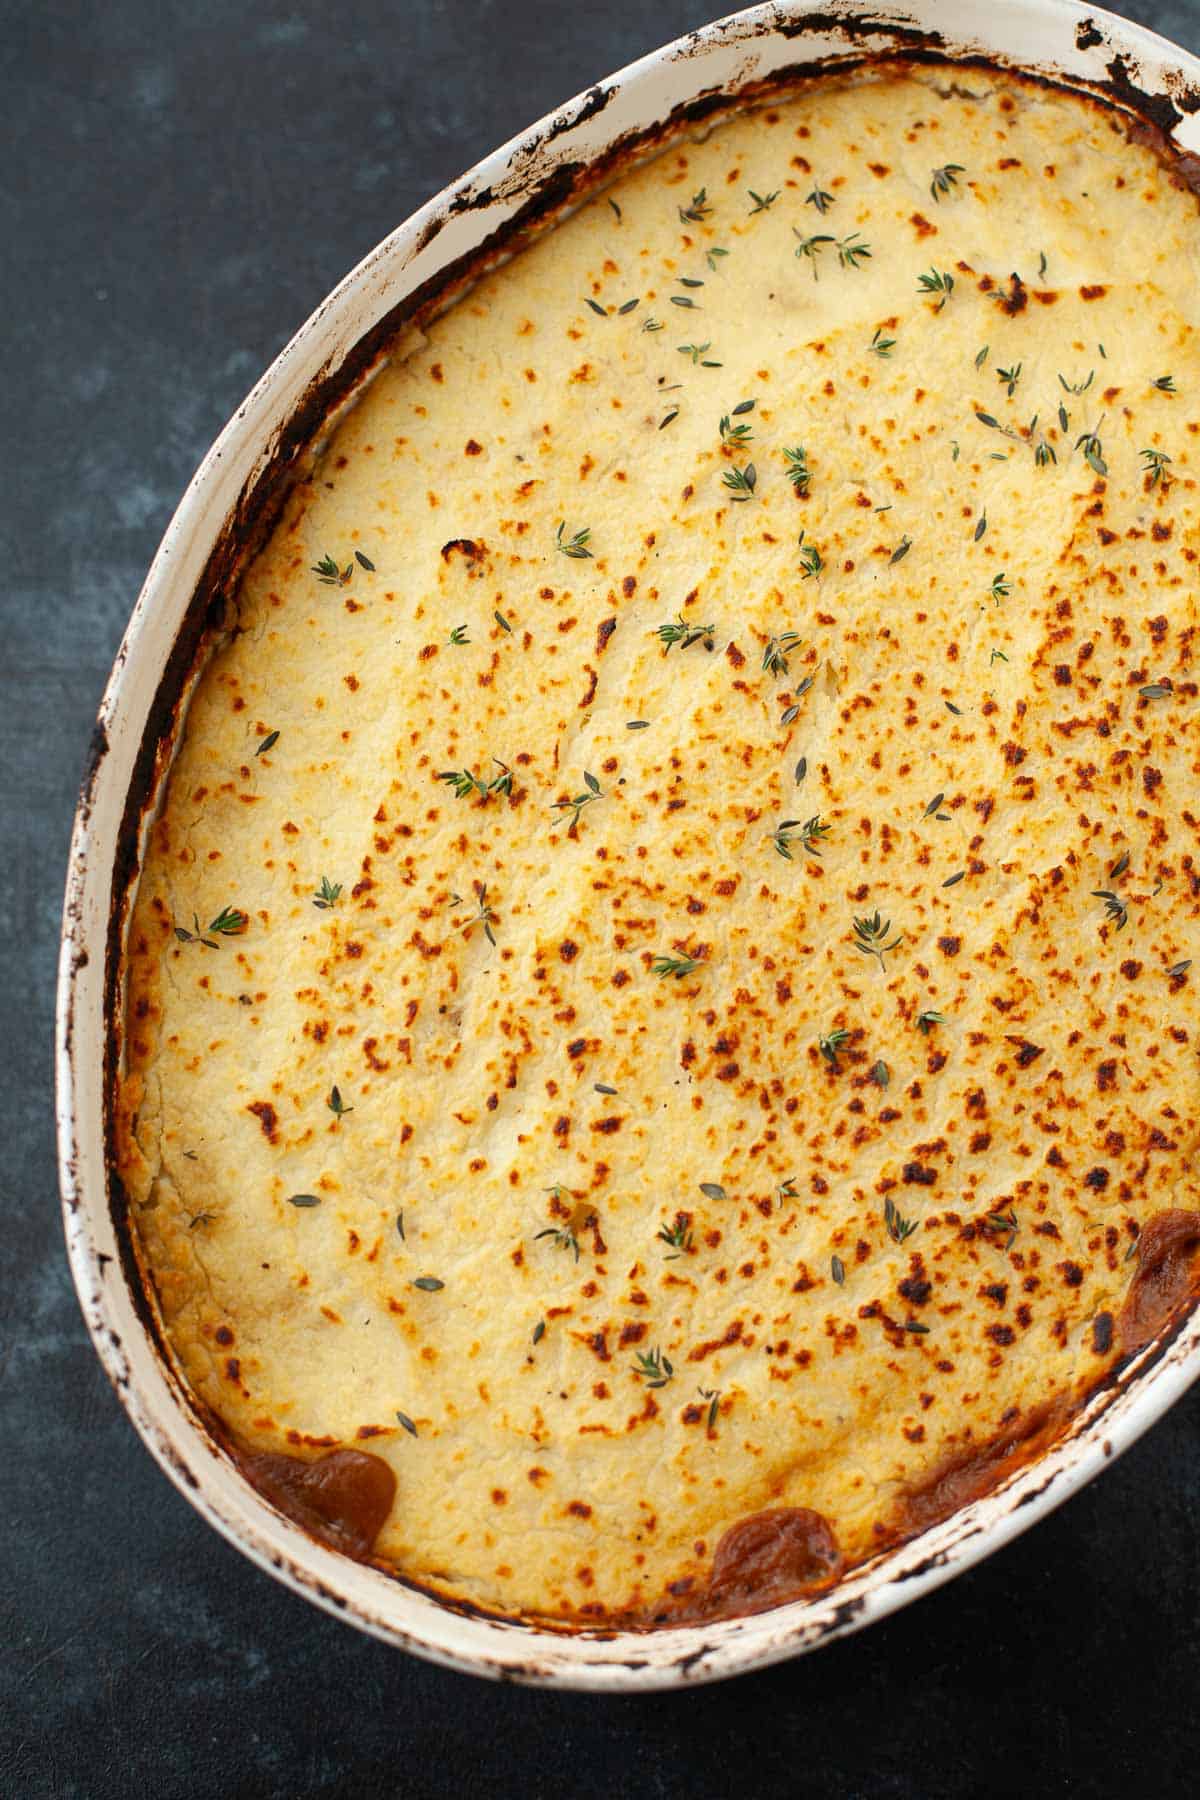 vegan shepherd's pie made with mashed cauliflower and lentils